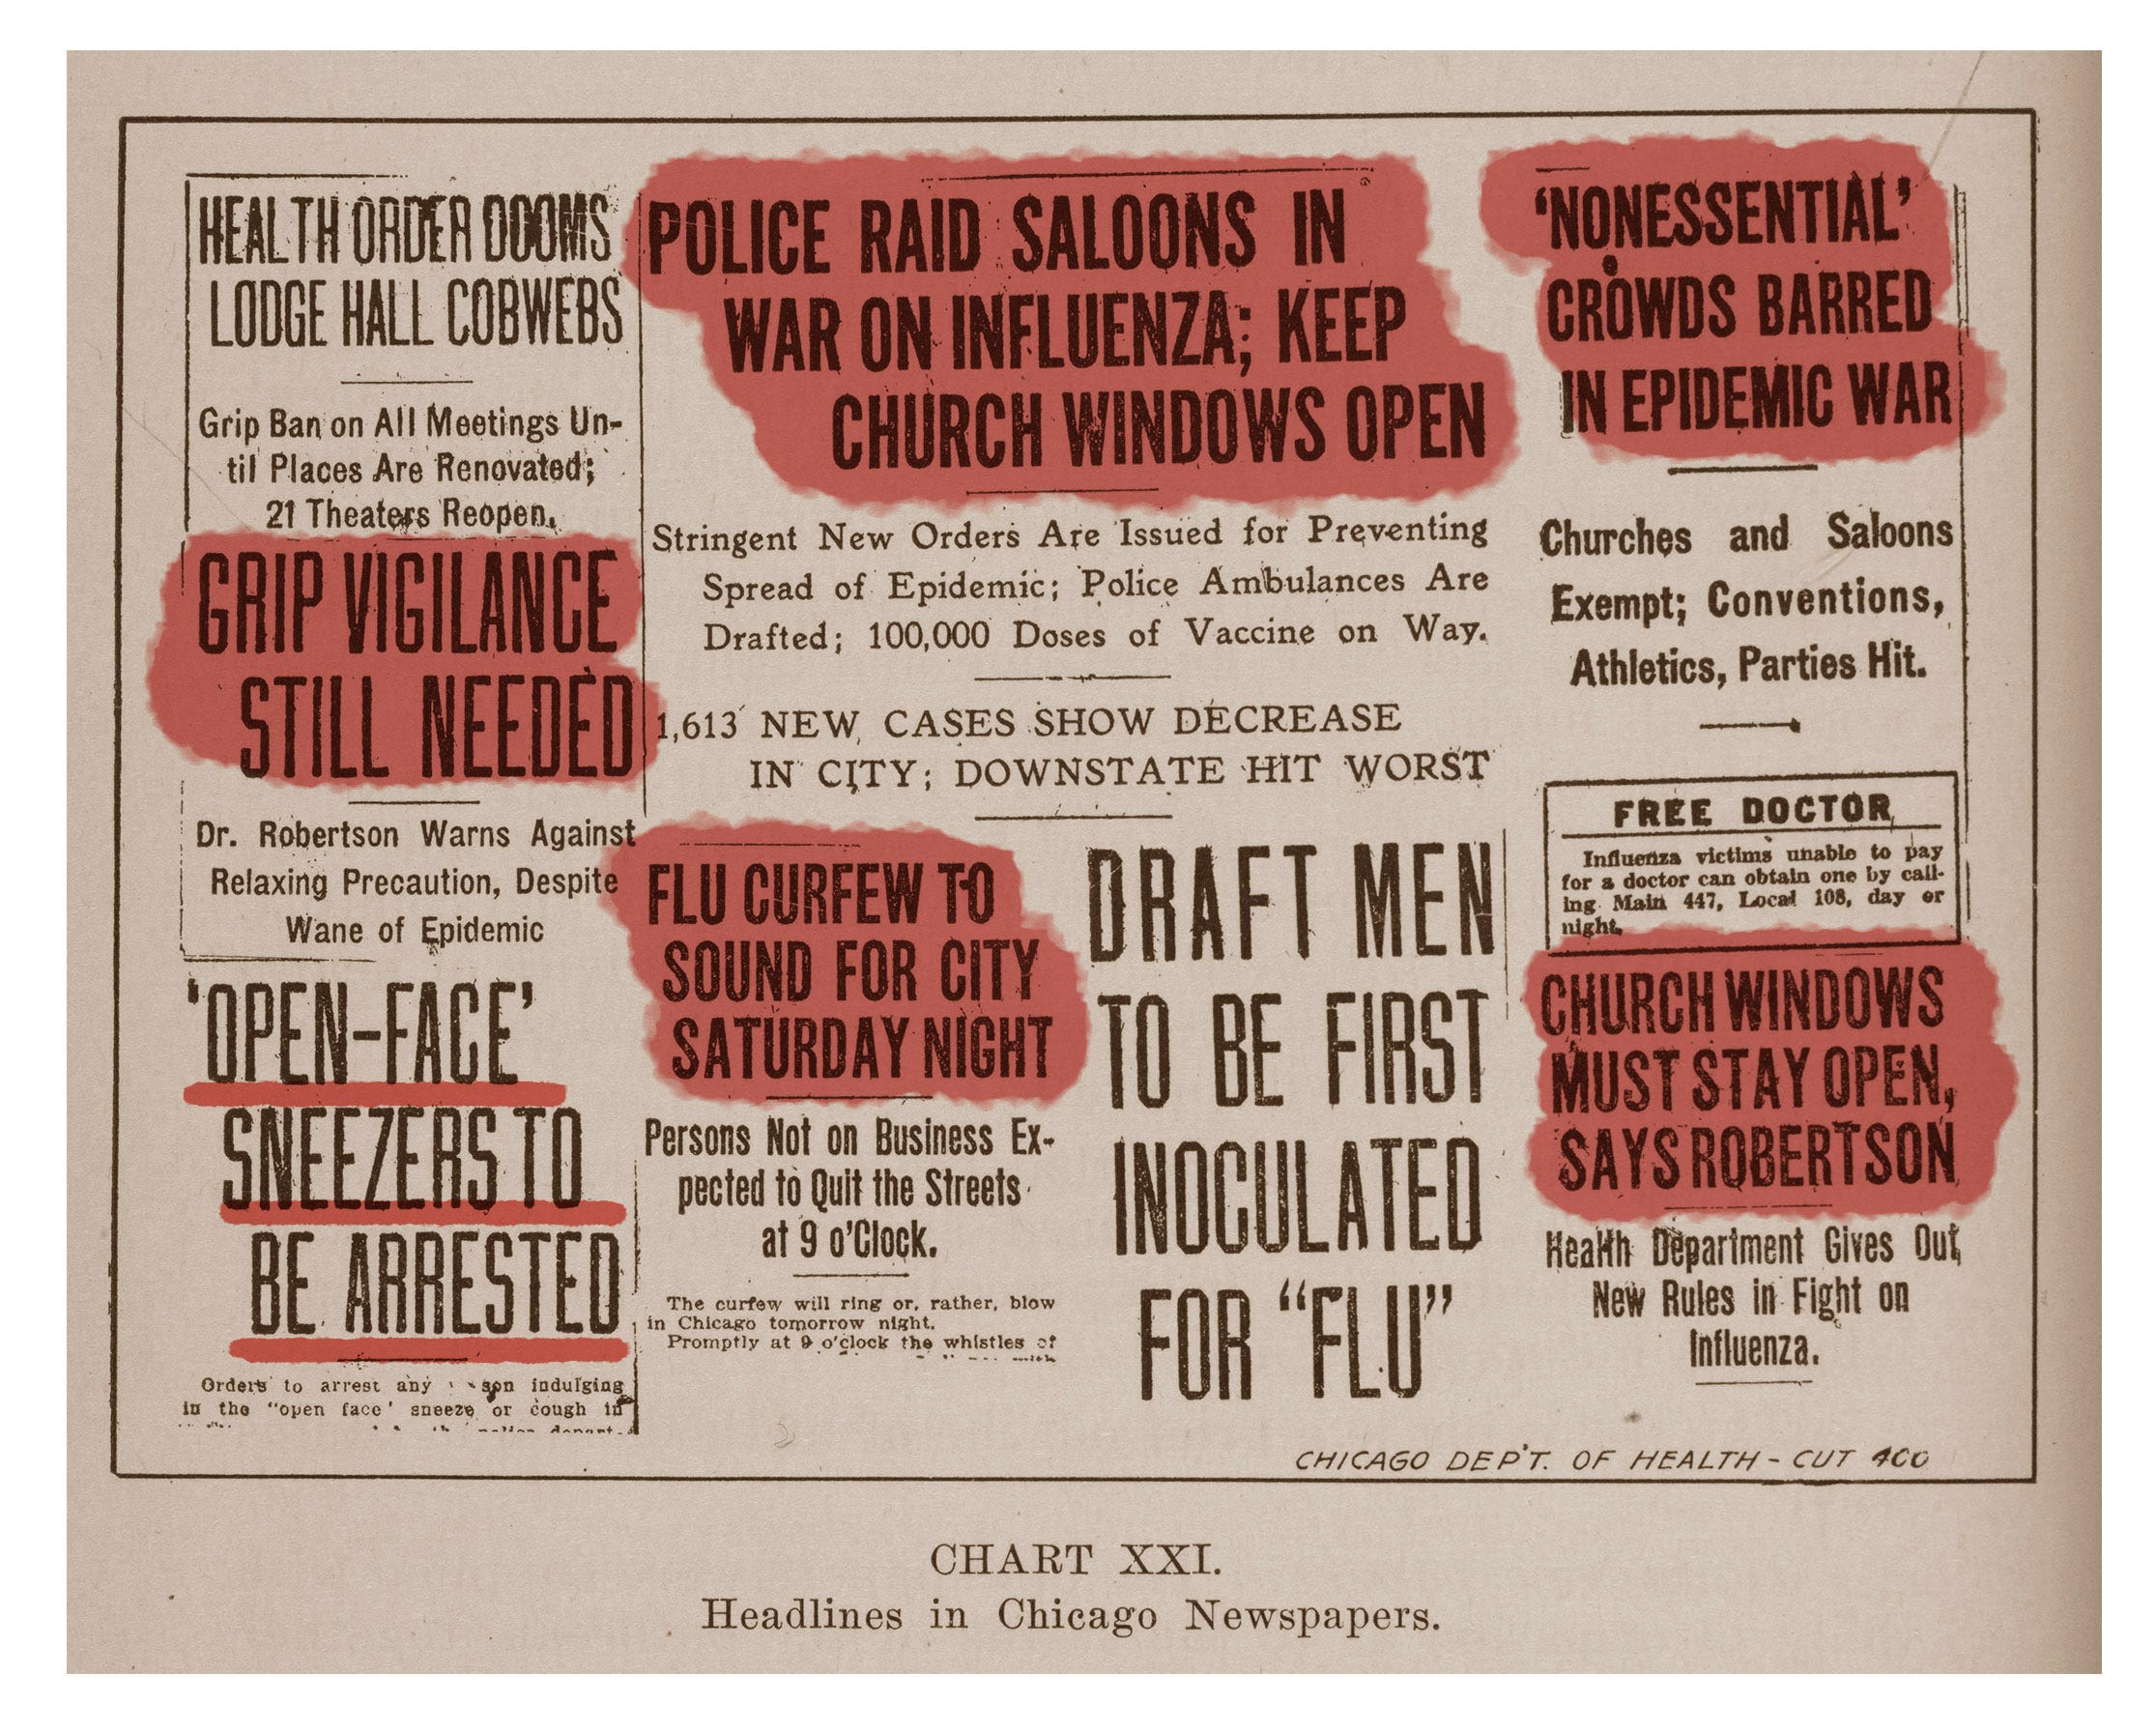 Newspaper headlines related to the Chicago influenza epidemic are included in a report written by Dr. John Dill Robertson, Commissioner of Health, published by the Department of Health in the fall of 1918. The report was part of an educational series.